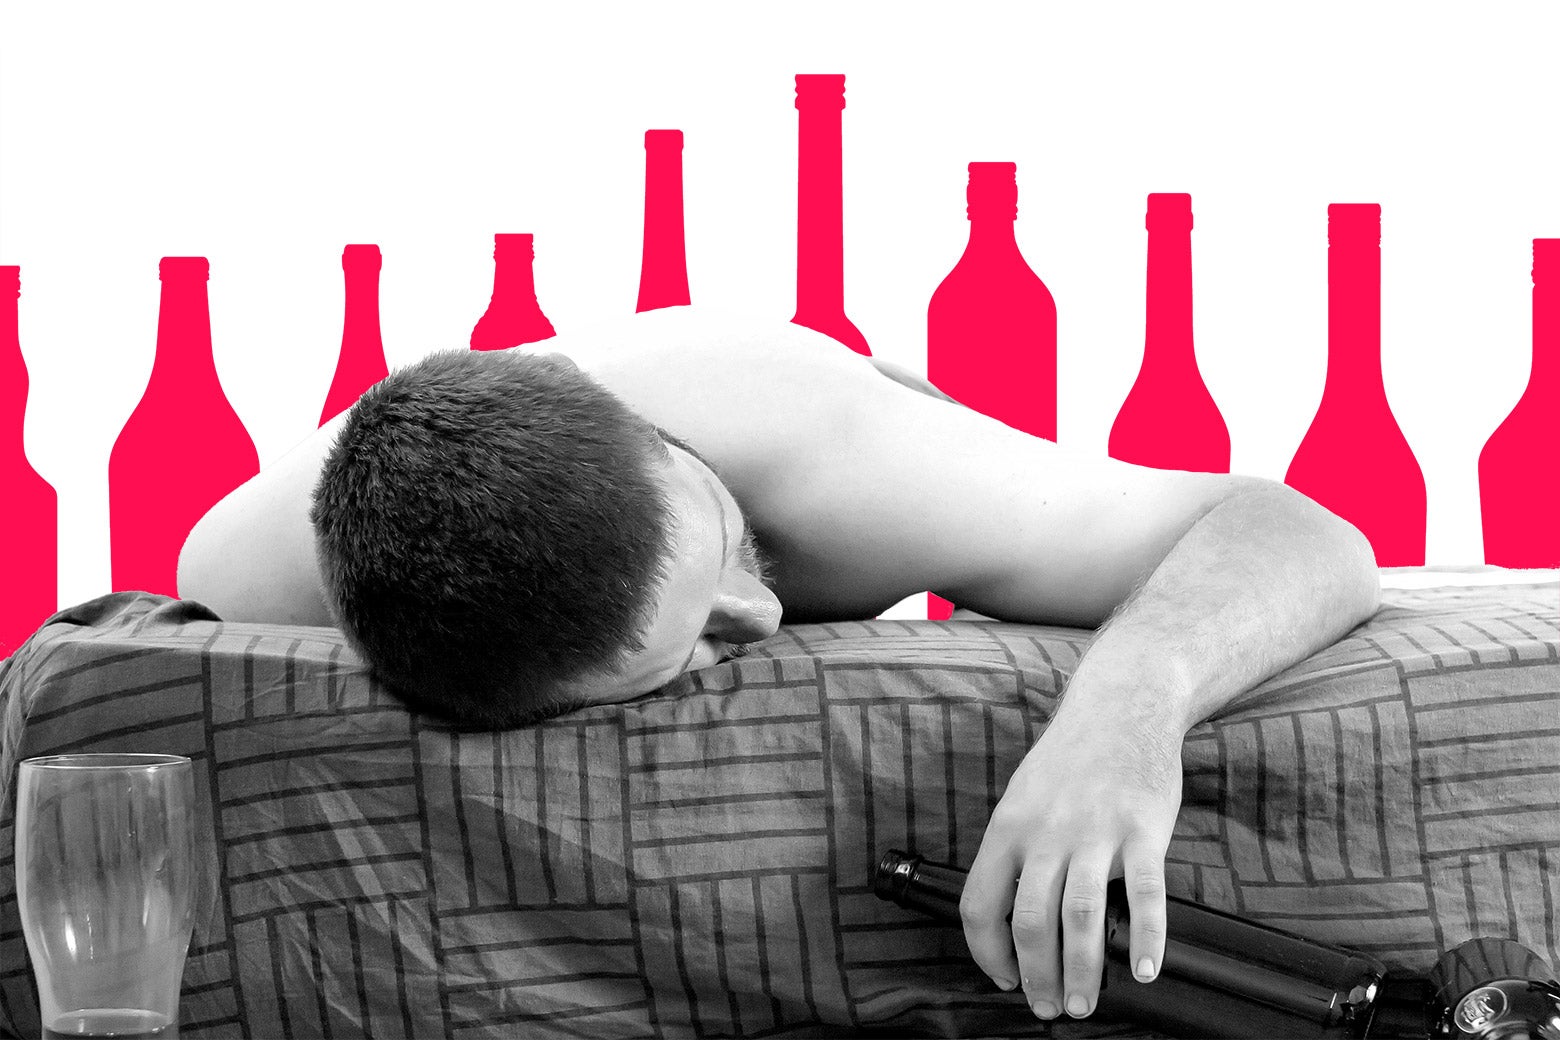 Man passed out drunk in bed with bottles lined up behind him.